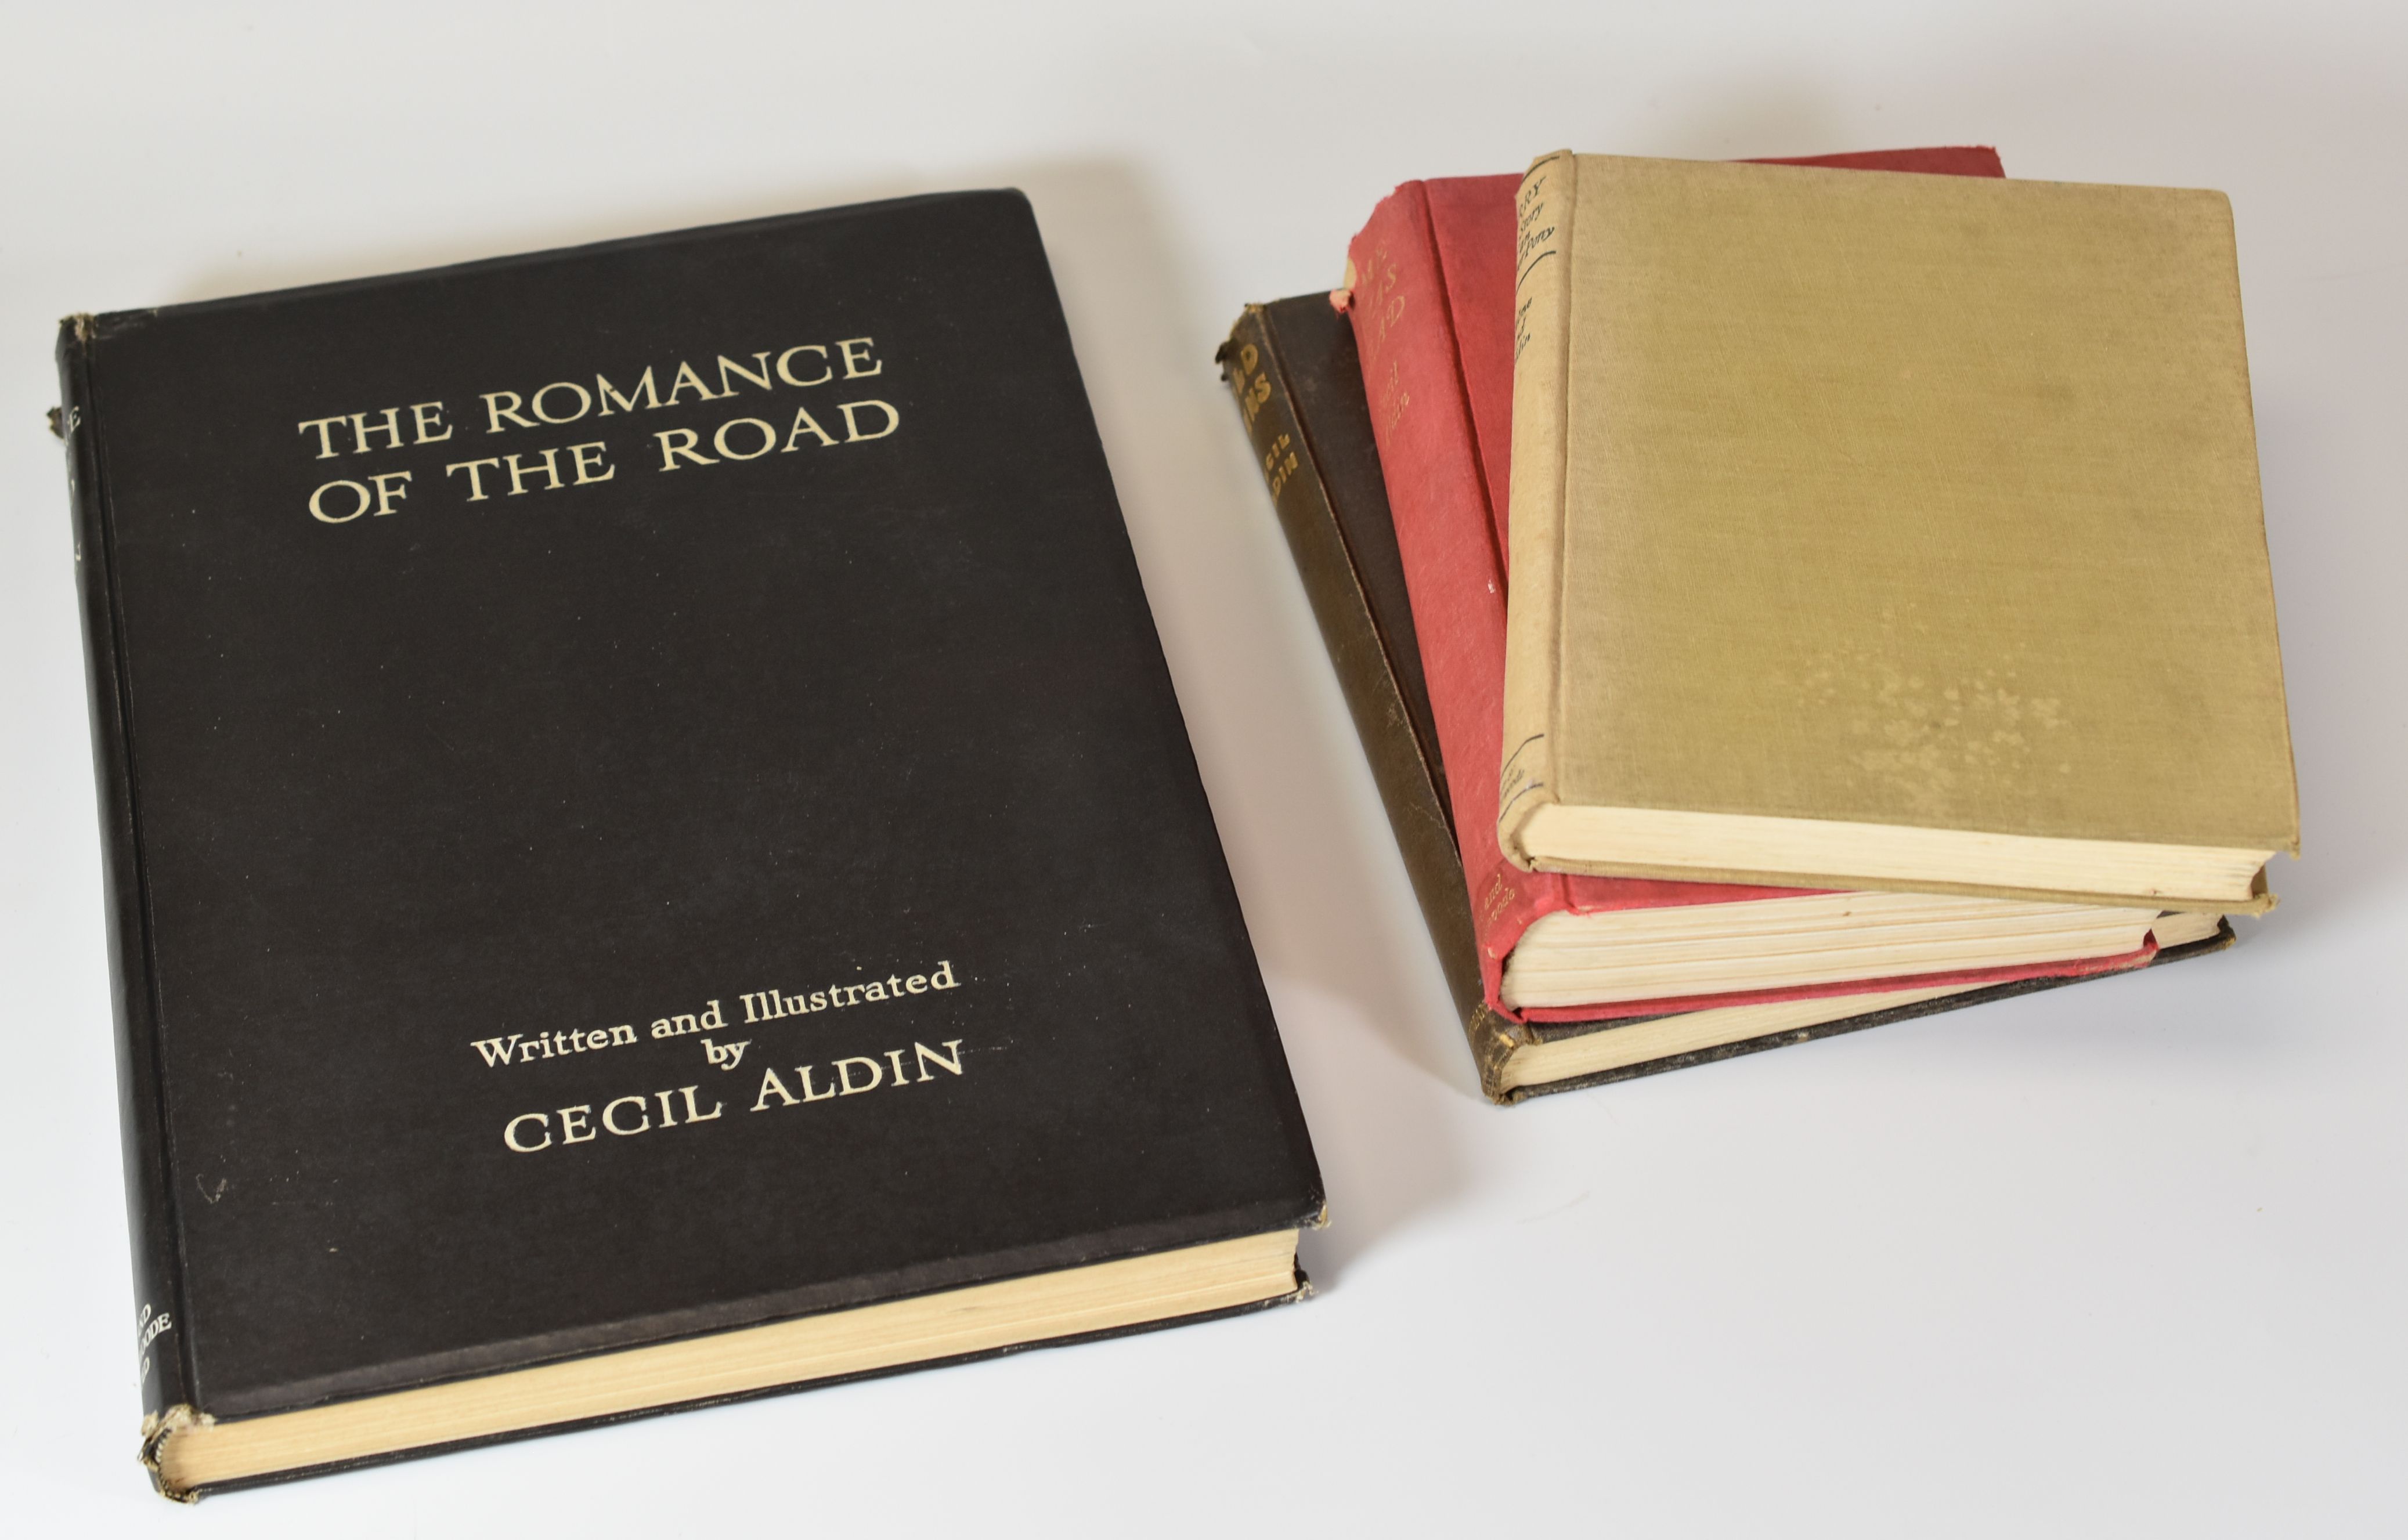 FOUR CECIL ALDIN BOOKS 'Old Inns', 'The Romance of the Road', 'Time I was Dead' and 'Jerry - The